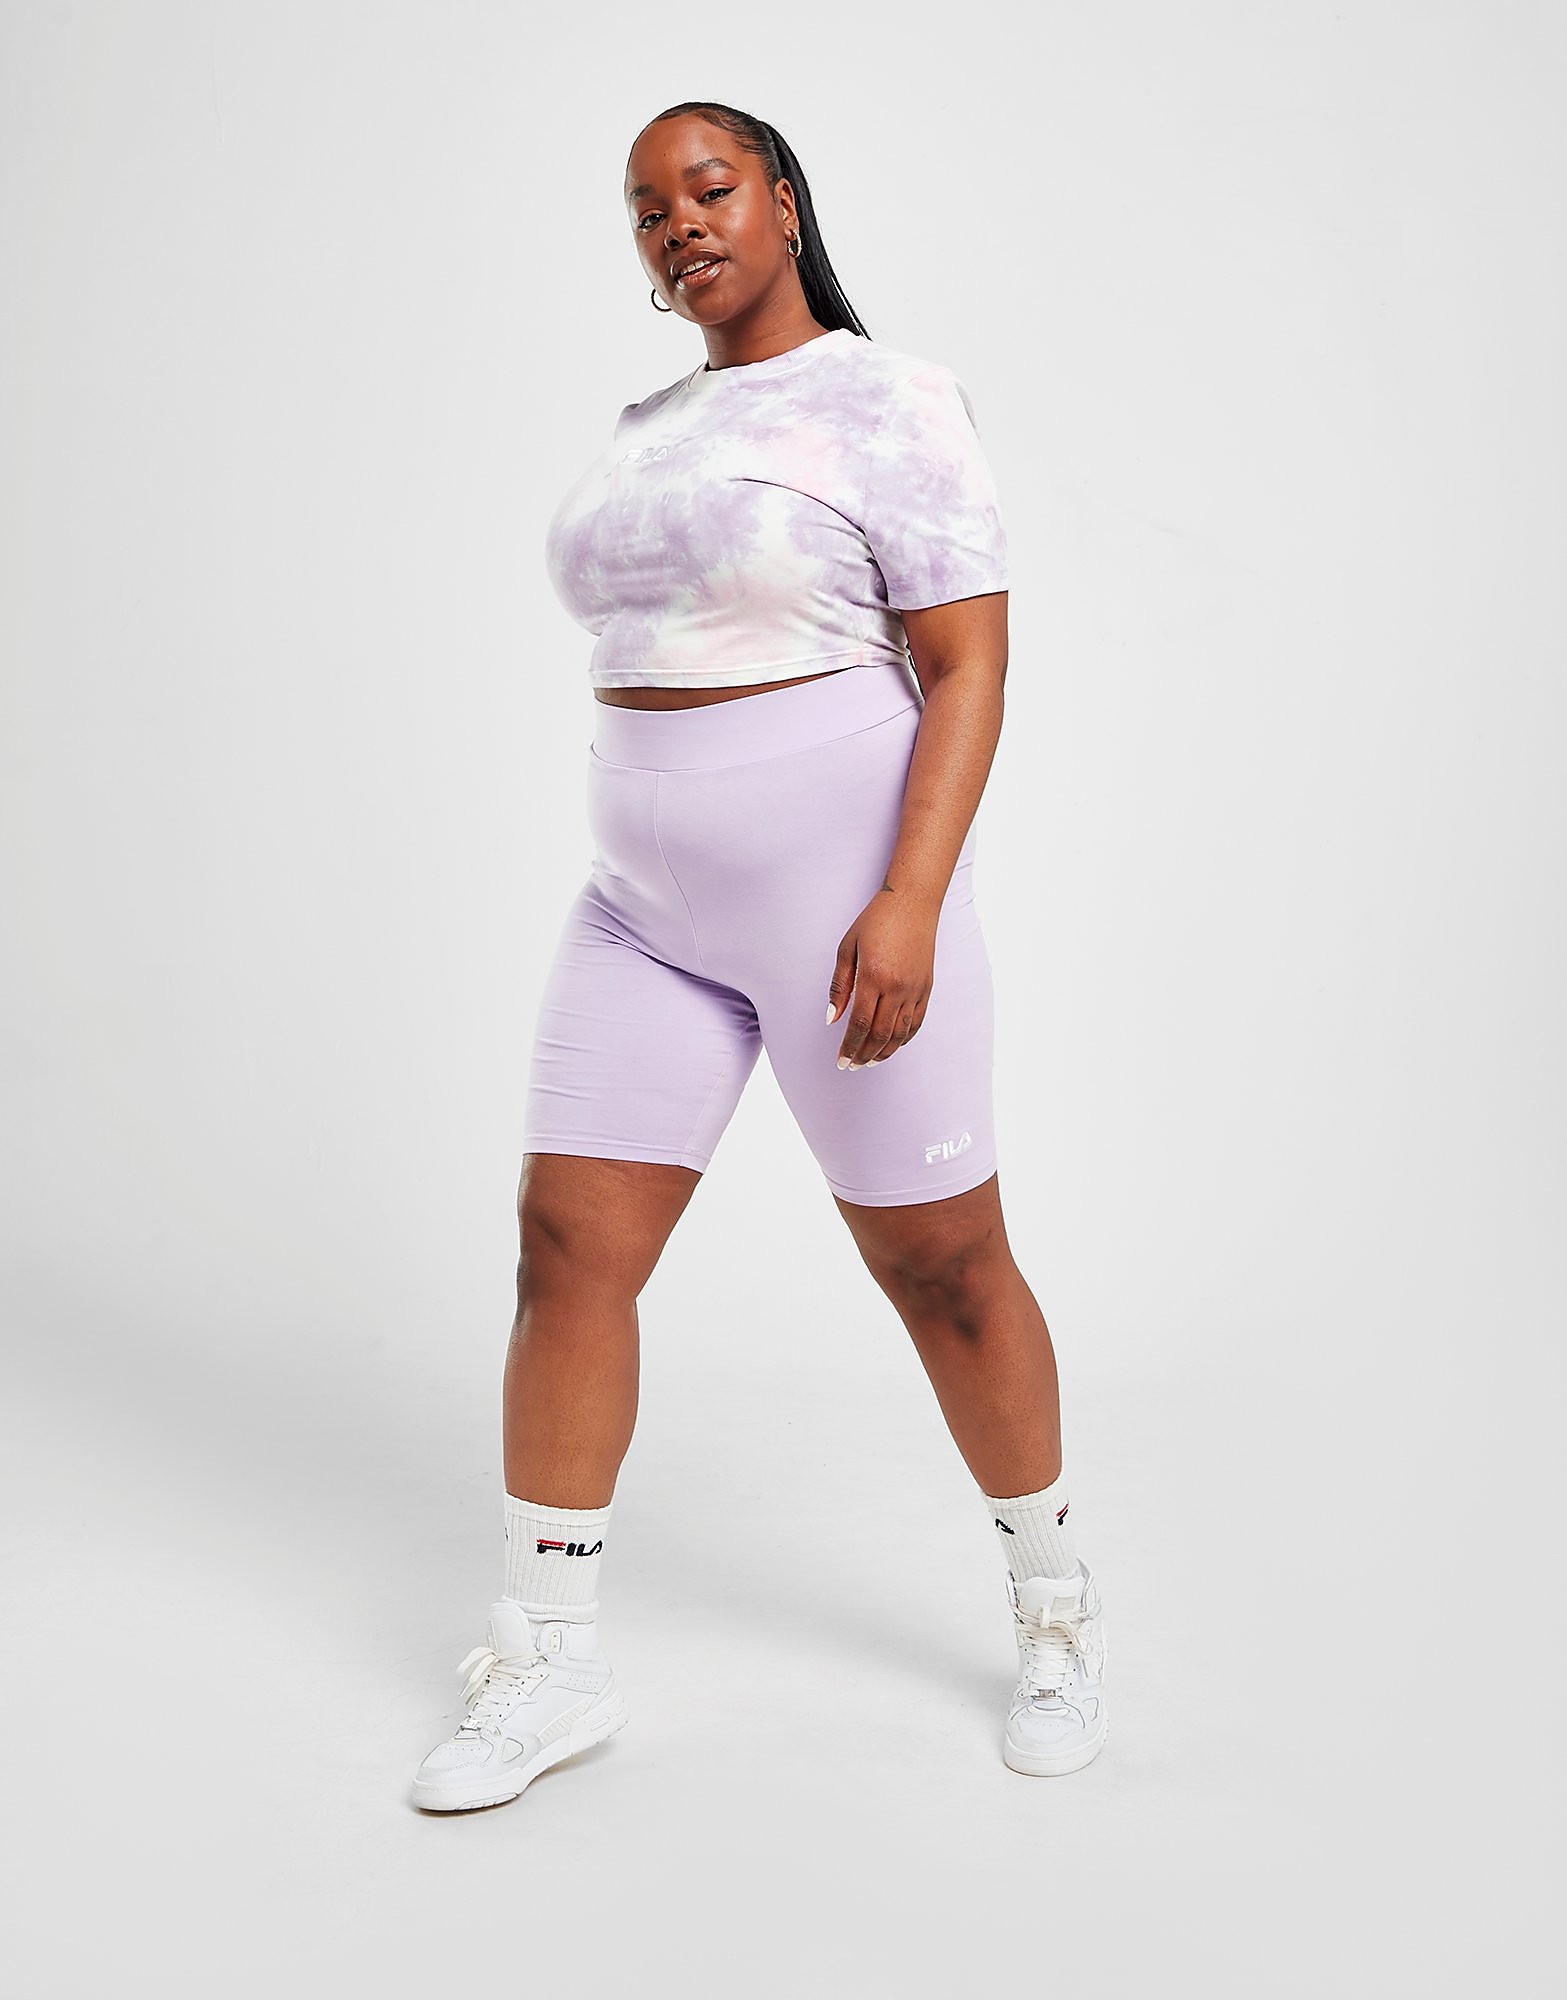 Fila core plus size cycle shorts - only at jd - womens, violetti, fila